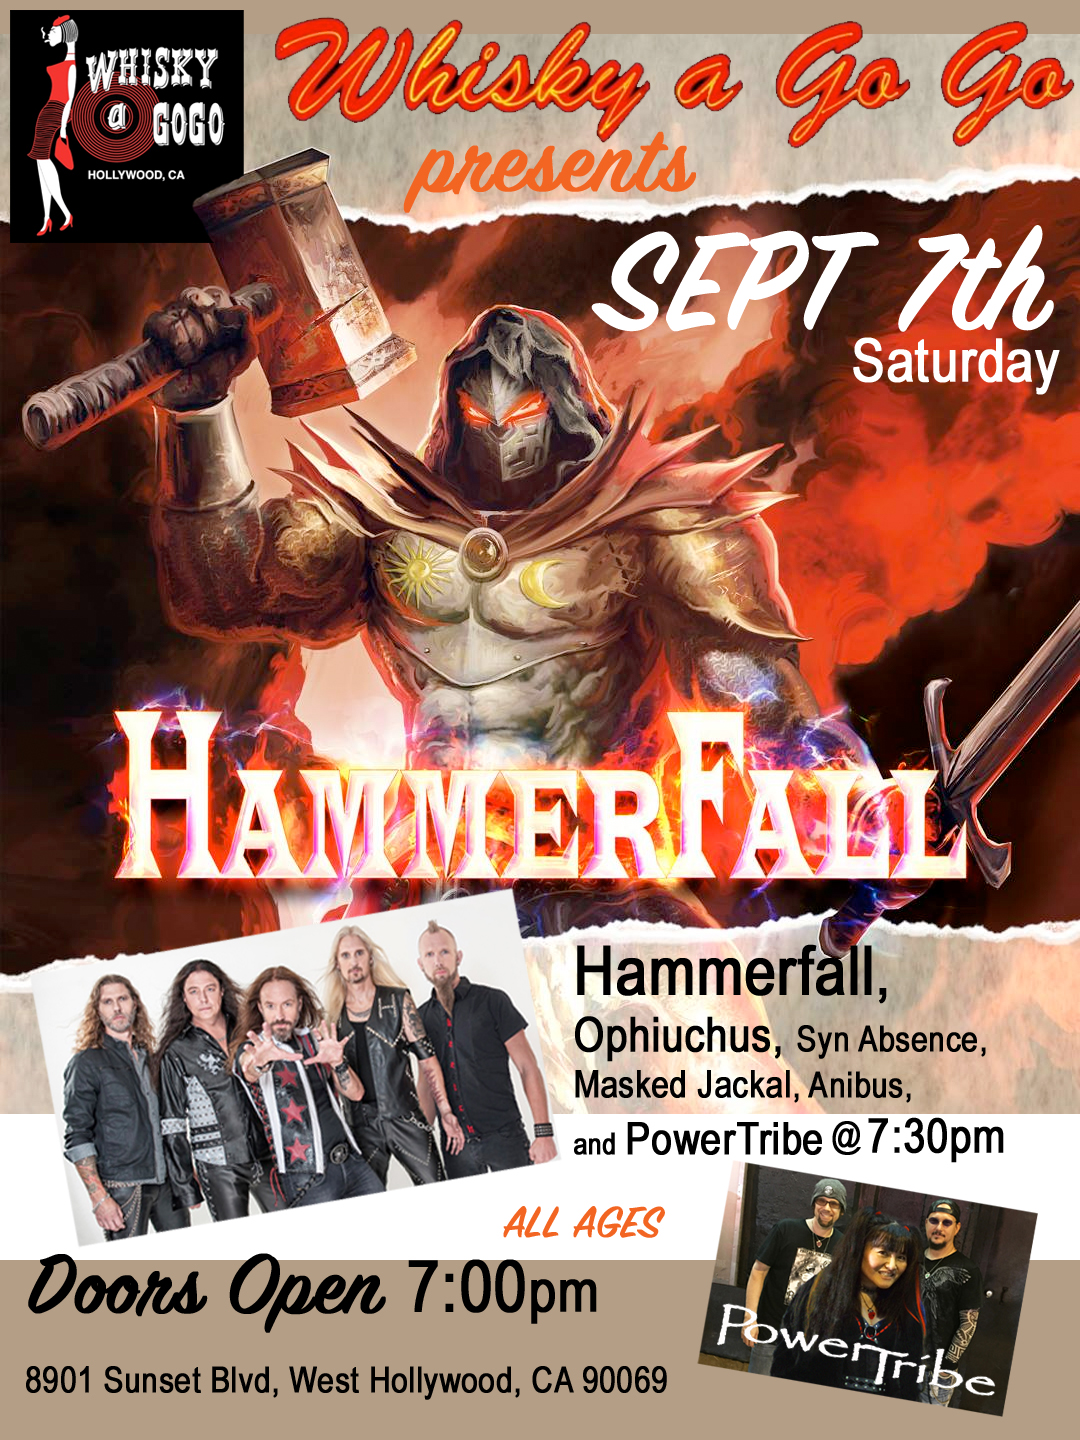 PowerTribe with HammerFall